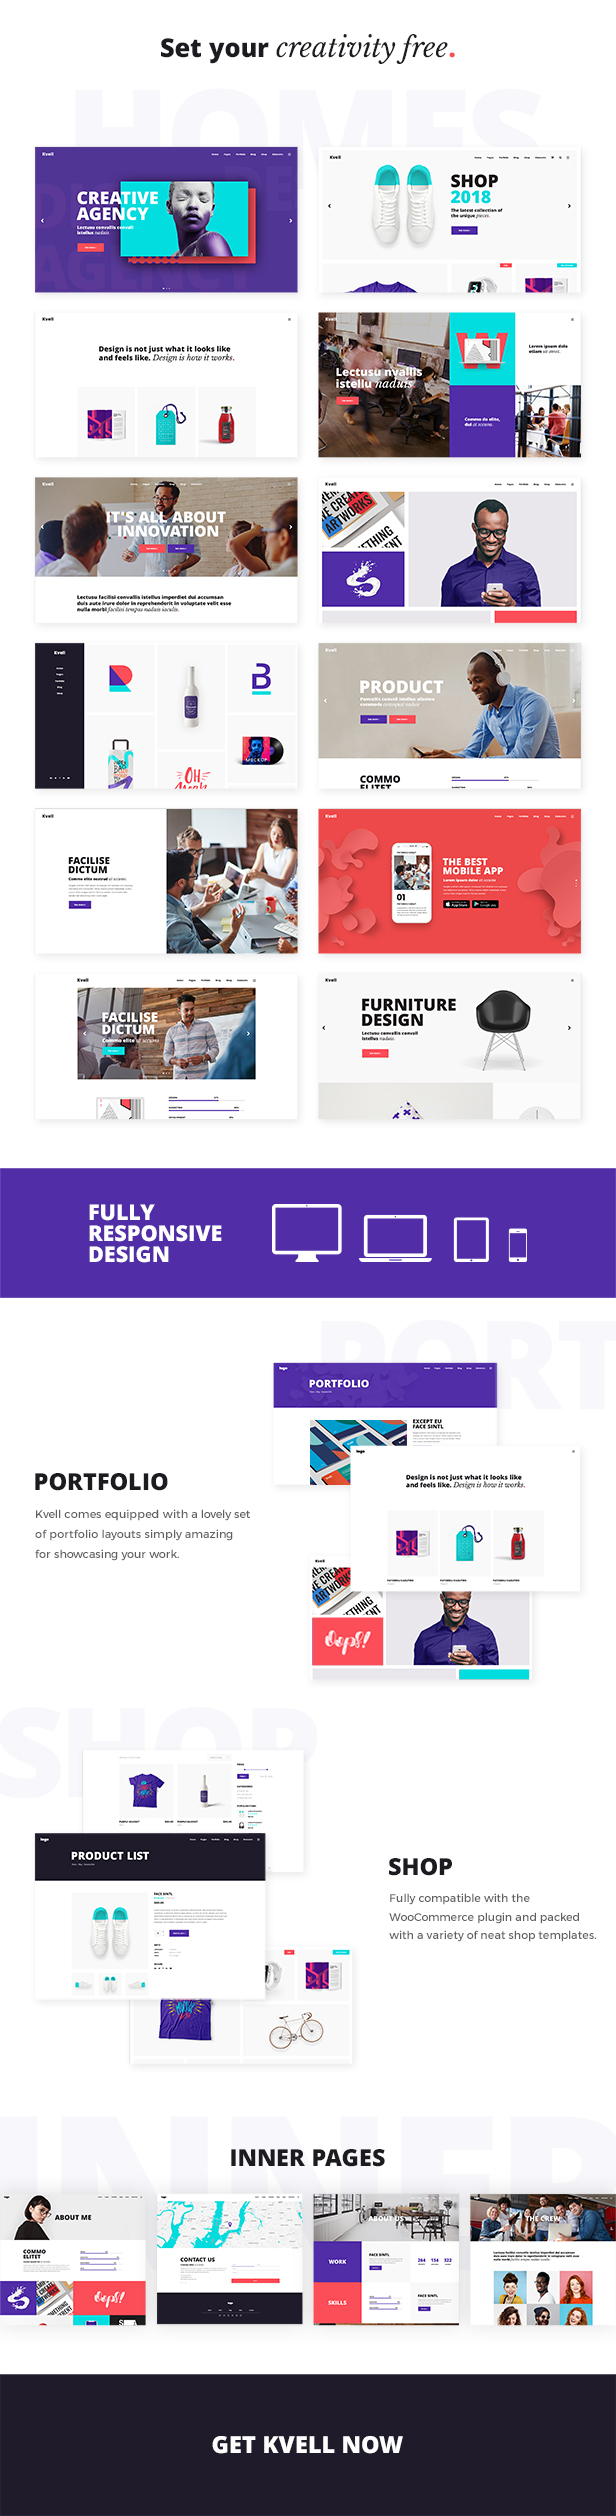 Kvell - A Creative Multipurpose Theme for Freelancers and Agencies - 1